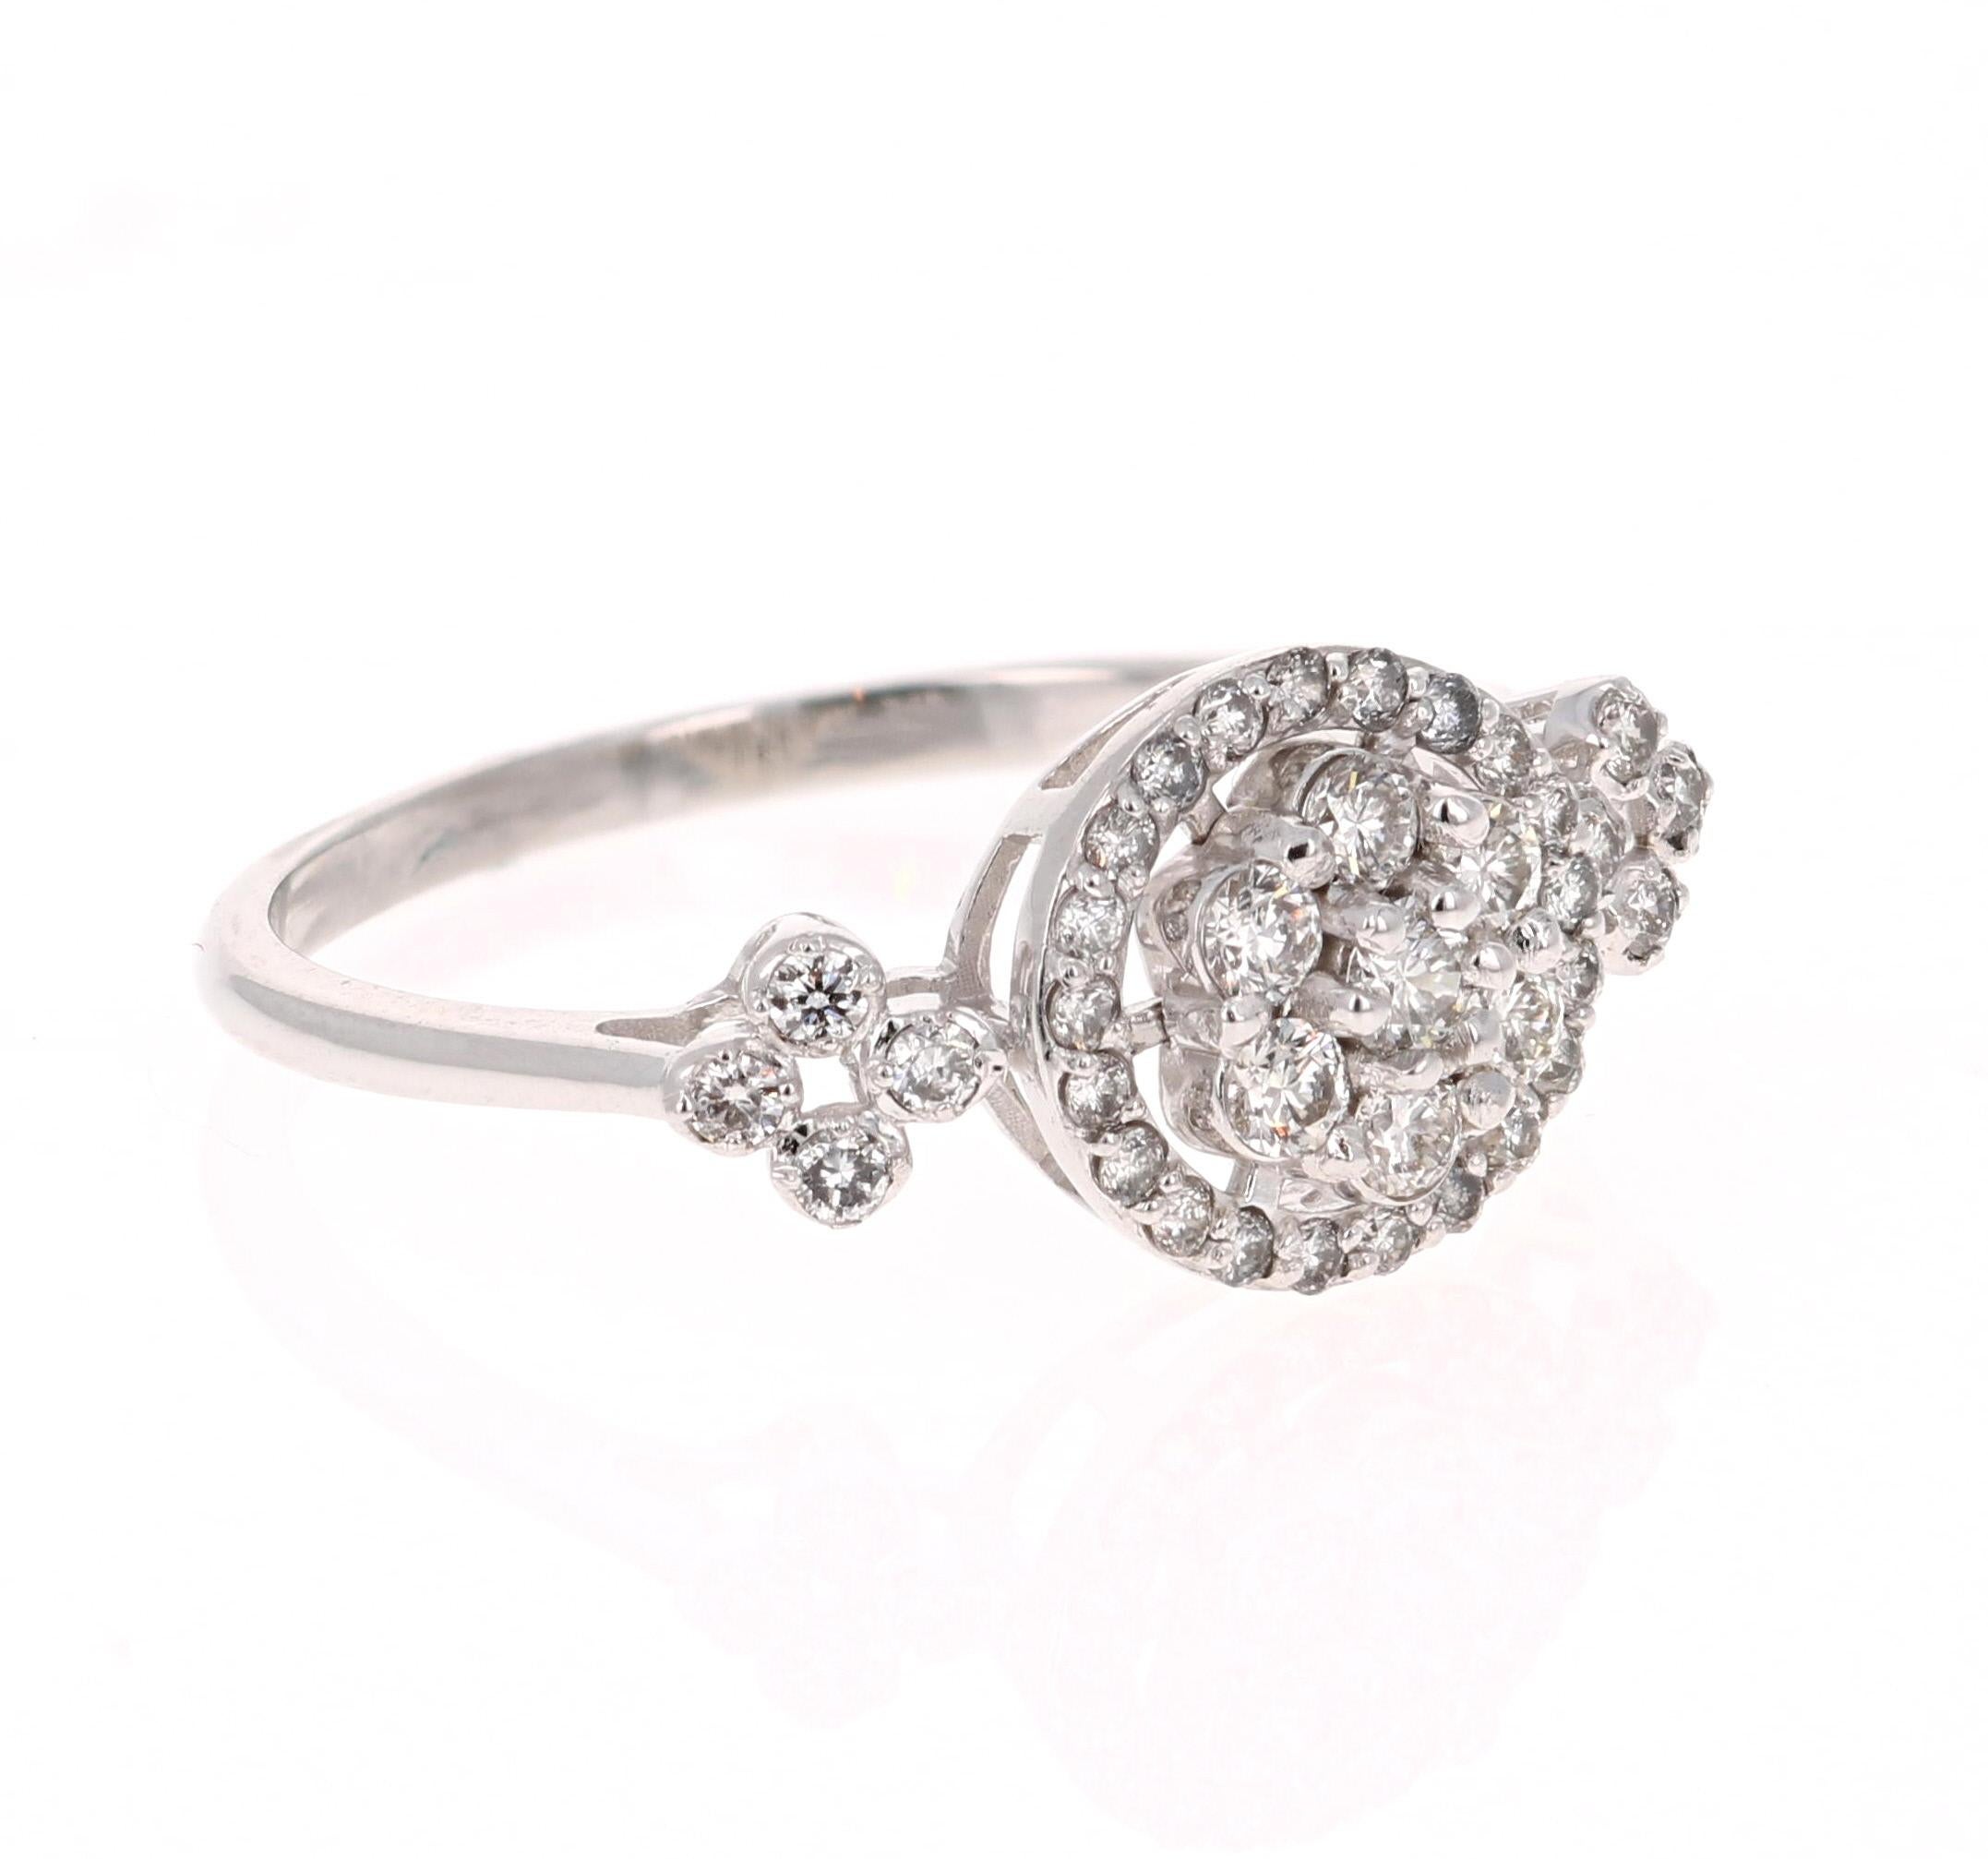 This ring has 36 Round Cut Diamonds that weigh 0.43 Carats. 

It is beautifully set in 18 Karat White Gold and weighs approximately 2.3 grams

The ring is a size 7 and can be re-sized free of charge. 
